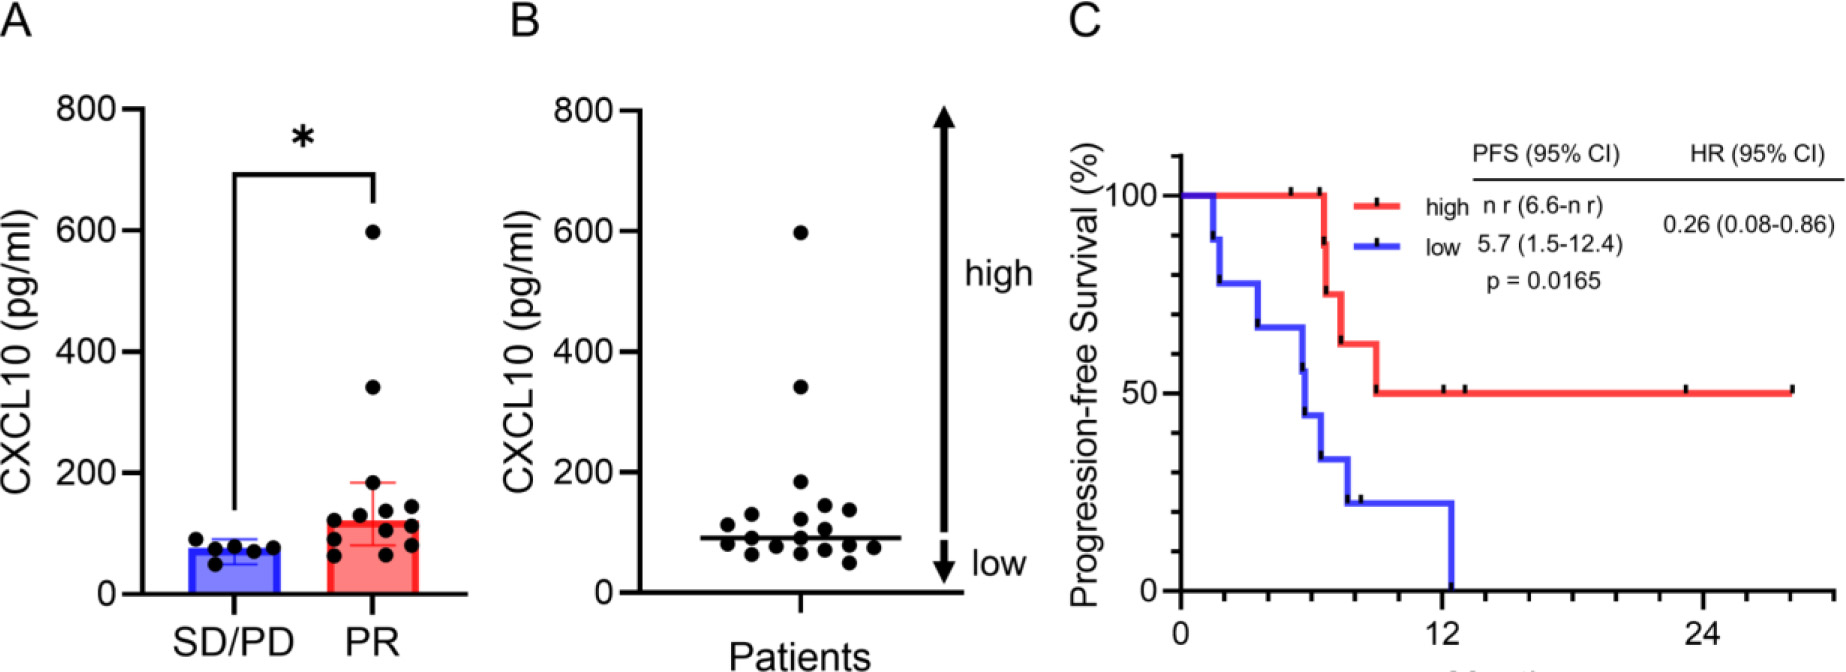 Plasma CXCL10 predicts clinical efficacy. (A) Plasma CXCL10 levels in PR and SD/PD patients. Data are medians ±95% CI. p-values were determined using the Mann–Whitney U test. (B) Dot plots of each patient’s data. Patients were divided into higher and lower groups according to the median value (horizontal bar). (C) Kaplan-Meier curves of PFS for patients with higher and lower values of CXCL10. * P< 0.05; nr, not reached; CXCL10, chemokine C-X-C ligand 10; PFS, progression-free survival; HR, hazard ratio; CI, confidence interval.